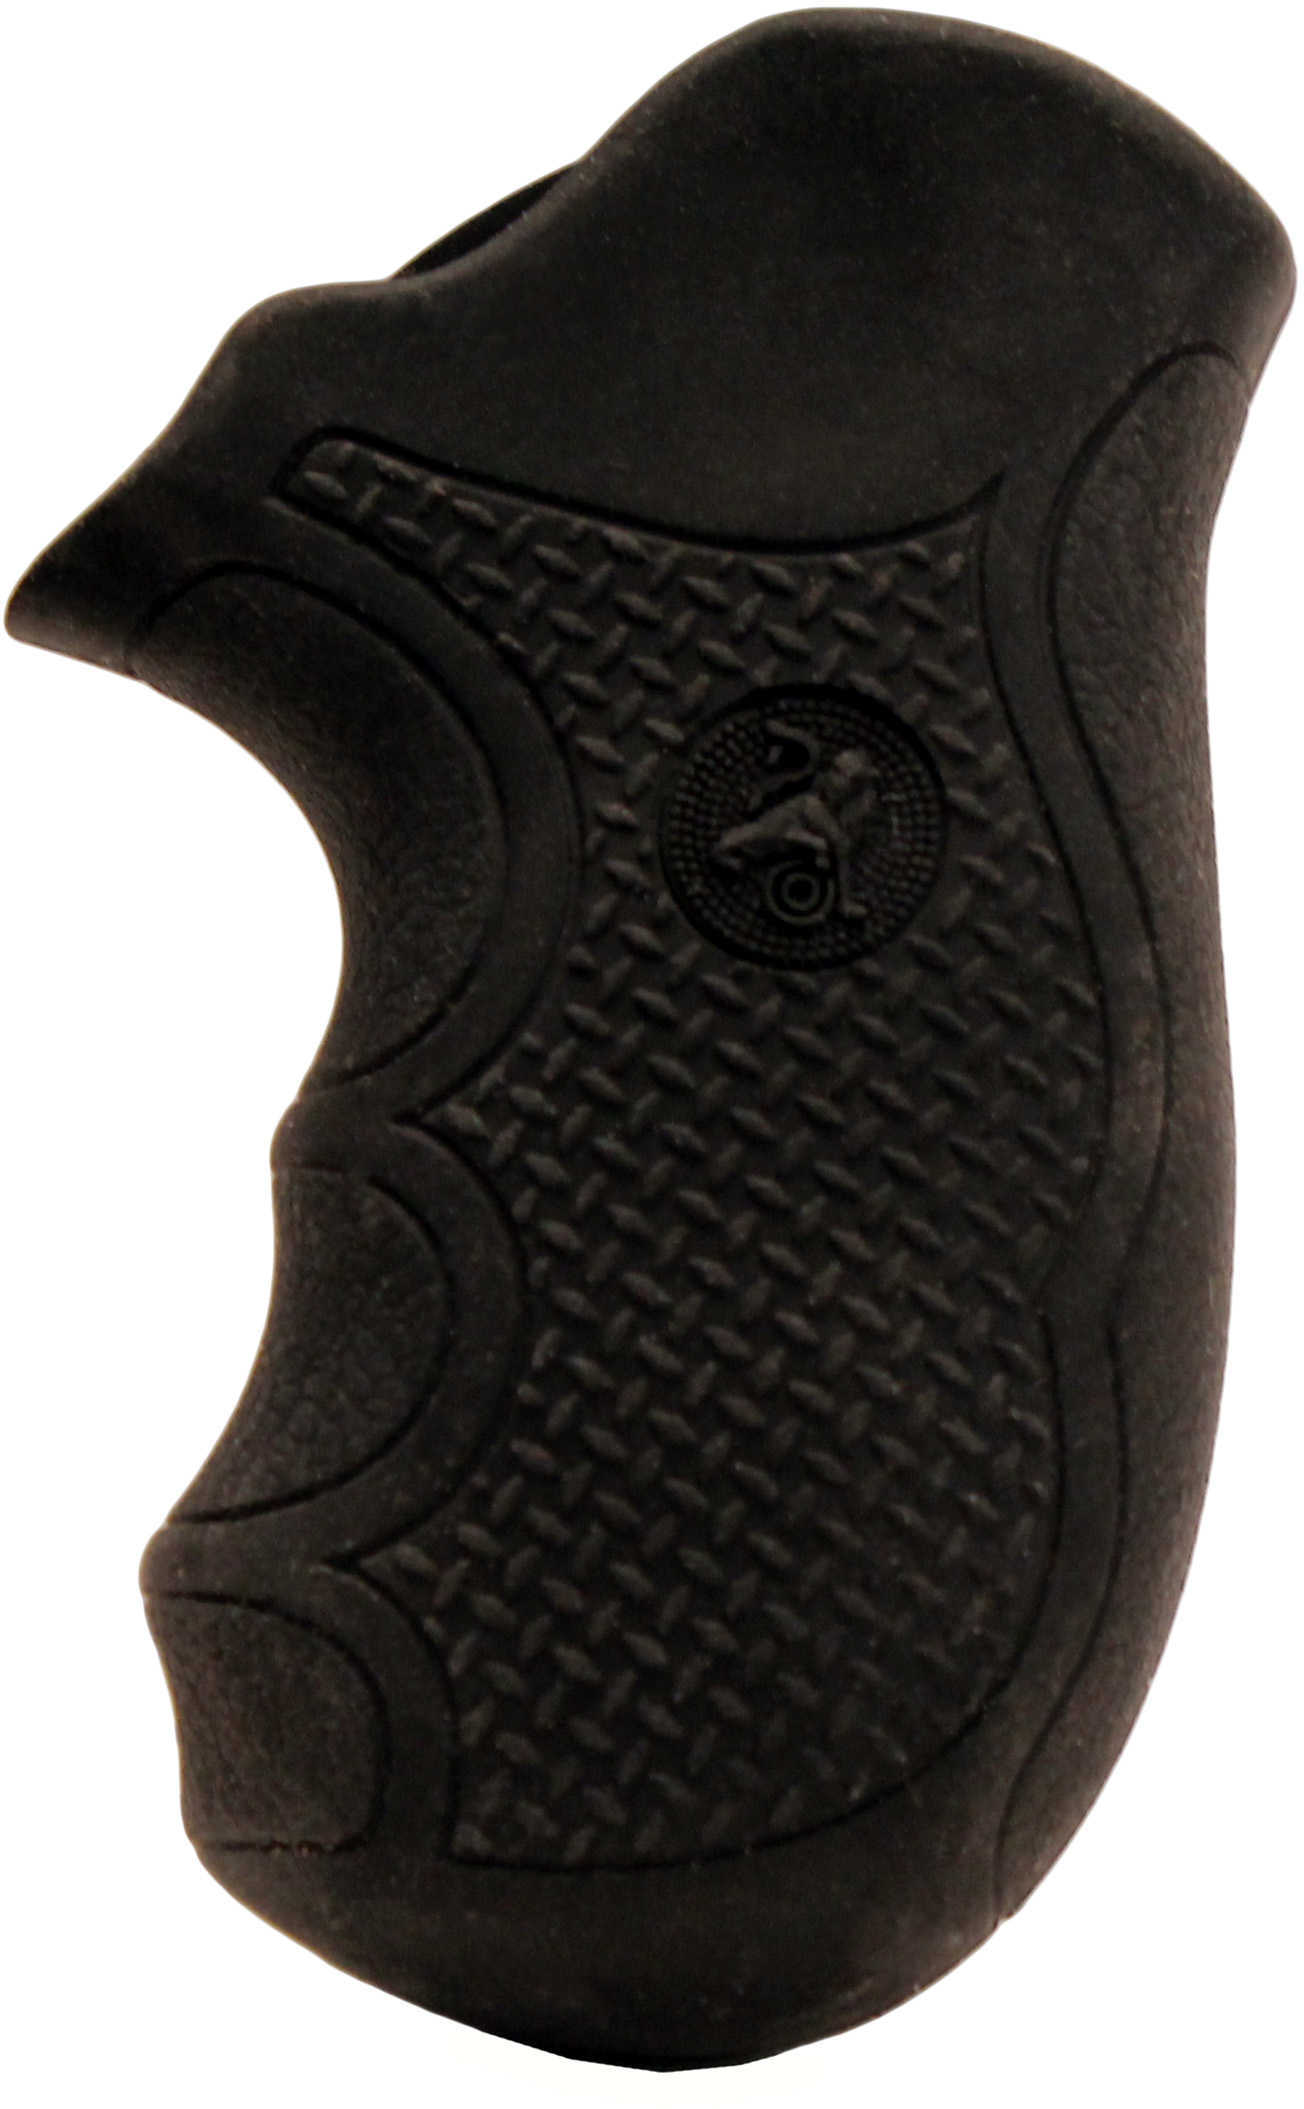 Pachmayr Diamond Pro Ruger Grips SP101 Md: 02483